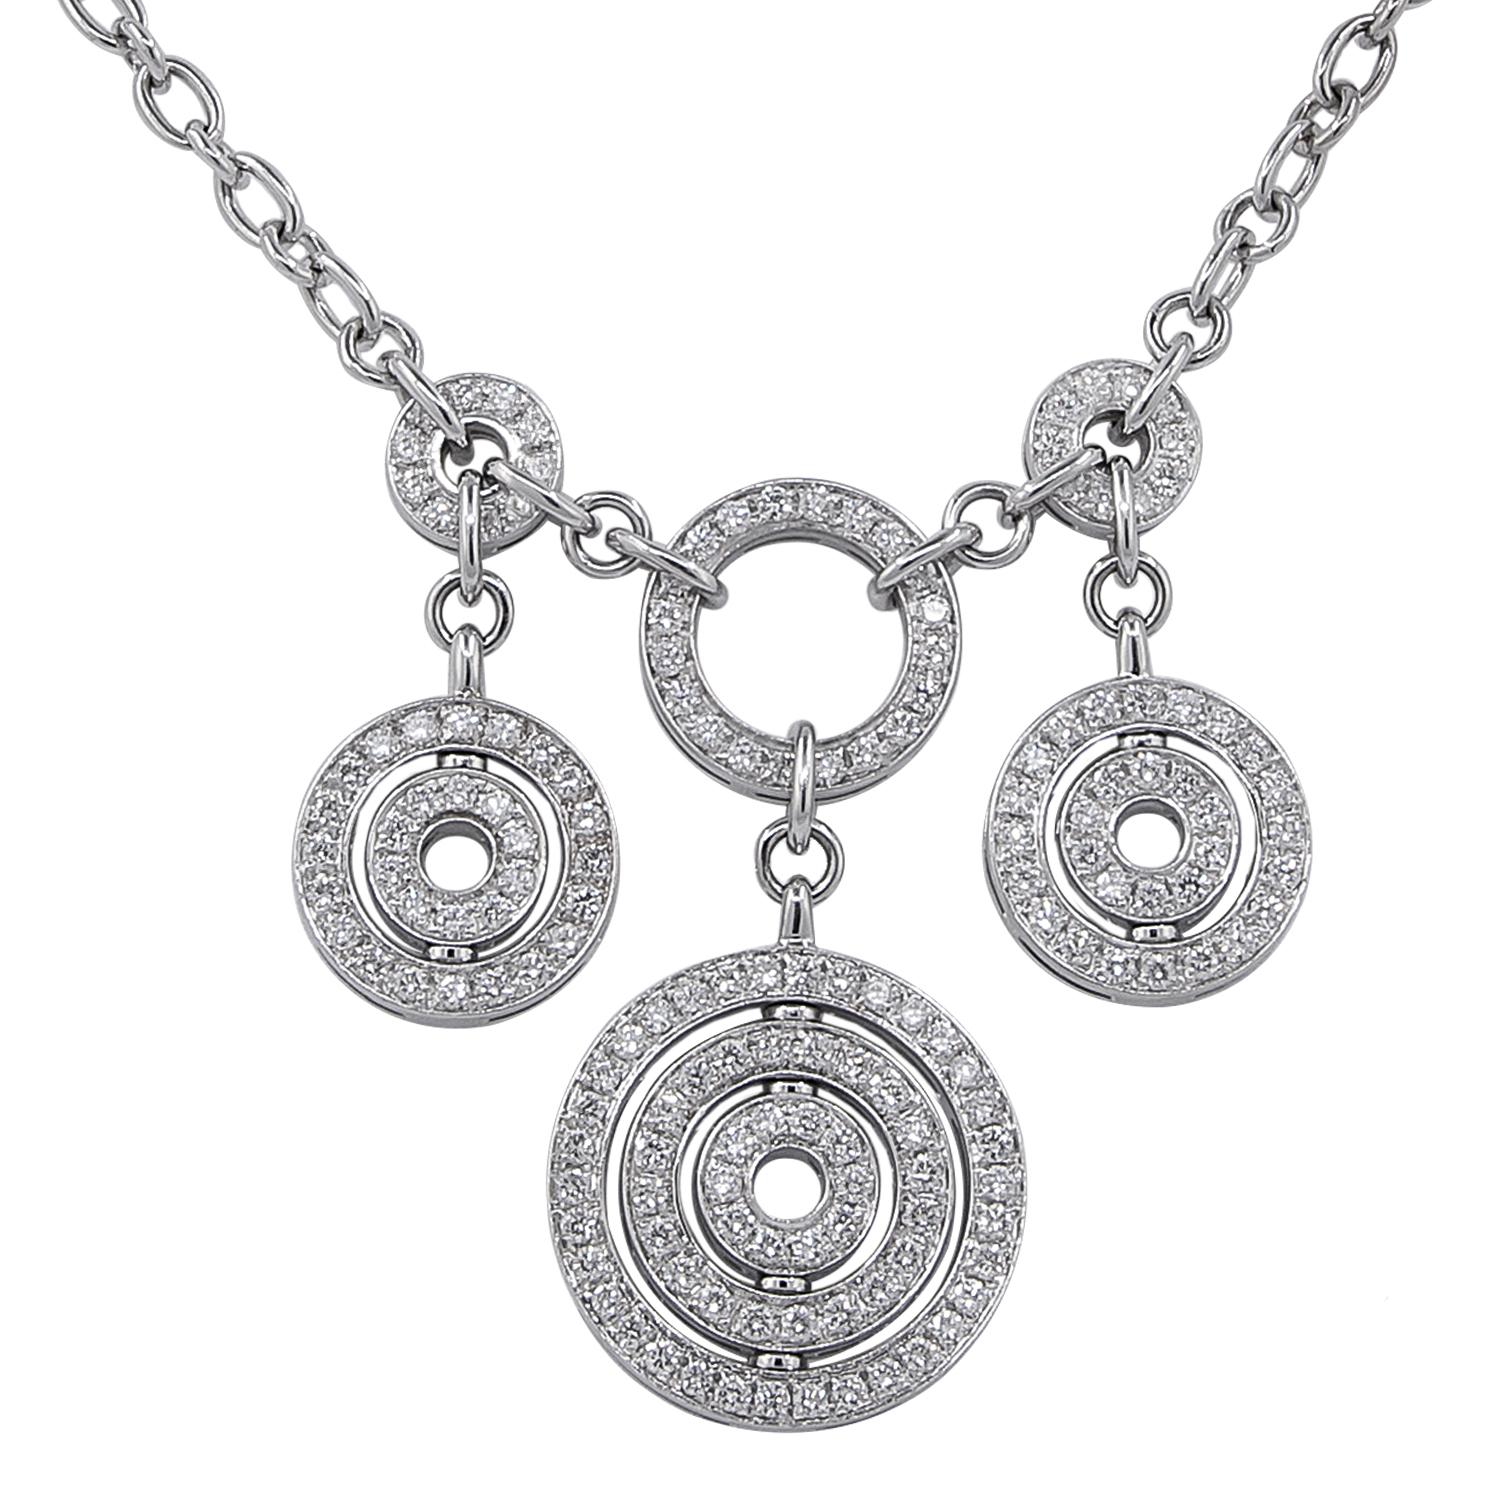 BULGARI Diamond Astrale Necklace.
An 18k white gold Astrale necklace, set with round brilliant-cut diamonds.
total length  approx. 16″
Signed “BVLGARI” and made in Italy
